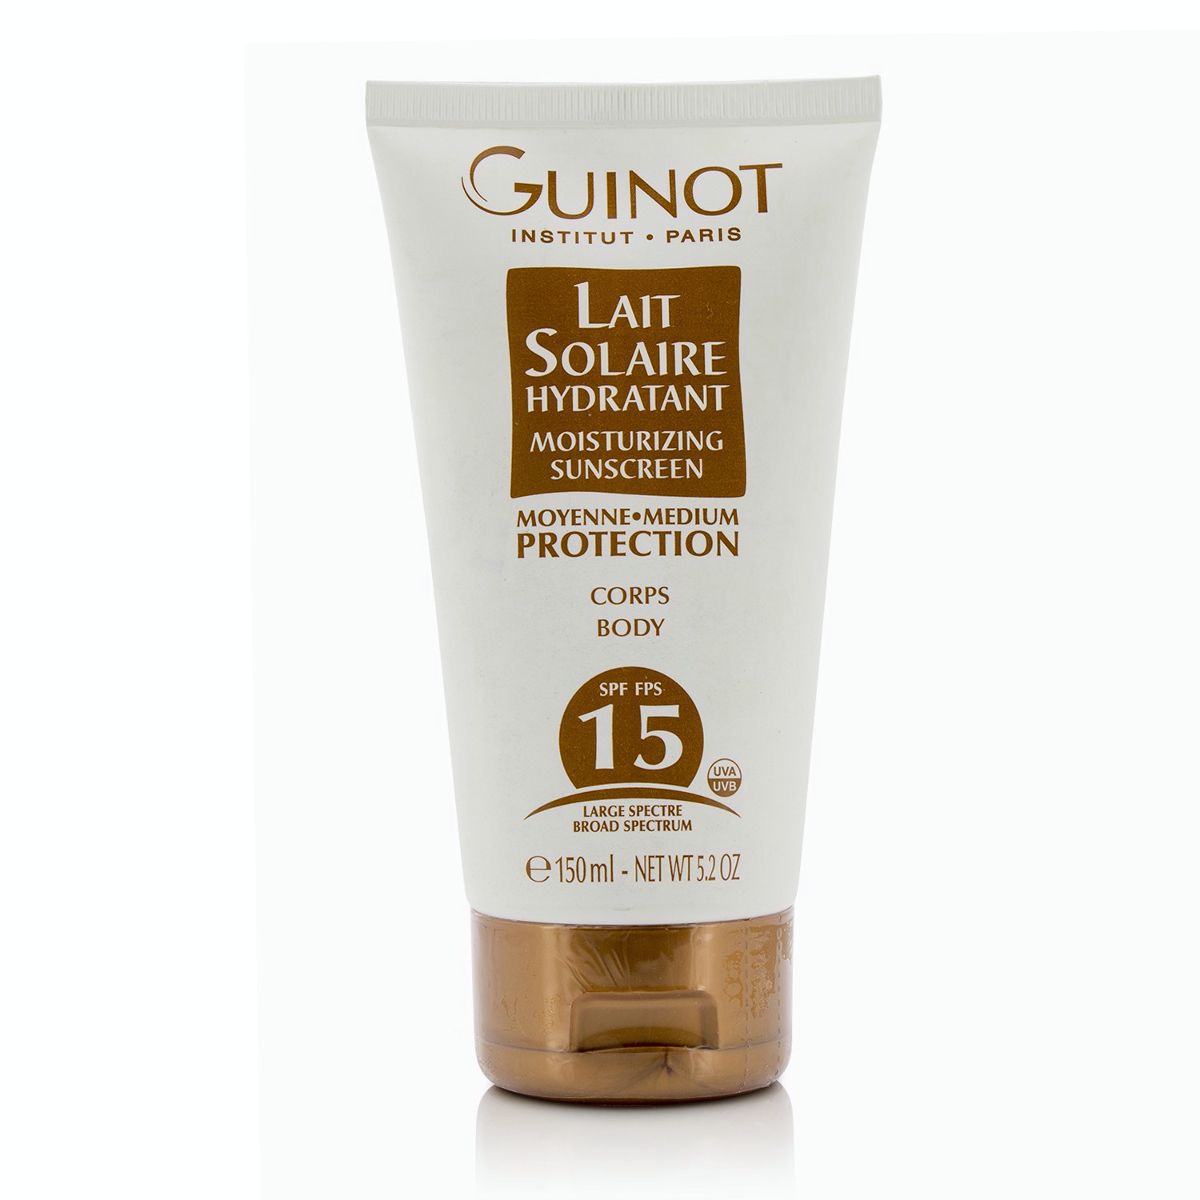 Lait Solaire Hydratant Moisturizing Sunscreen For Body SPF15 Guinot Image